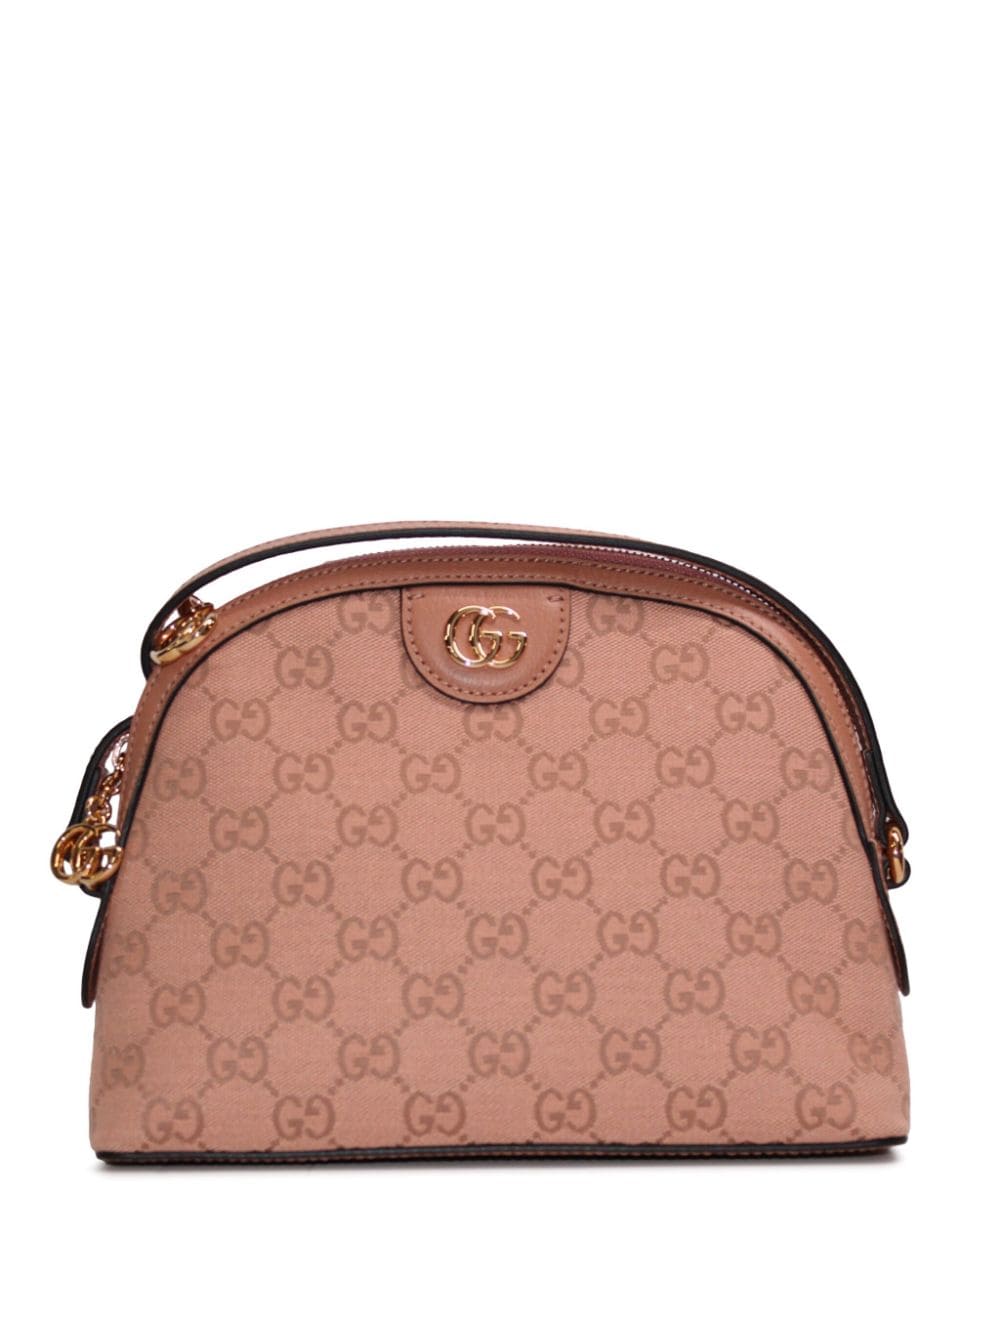 Gucci small Ophidia shoulder bag - Pink von Gucci